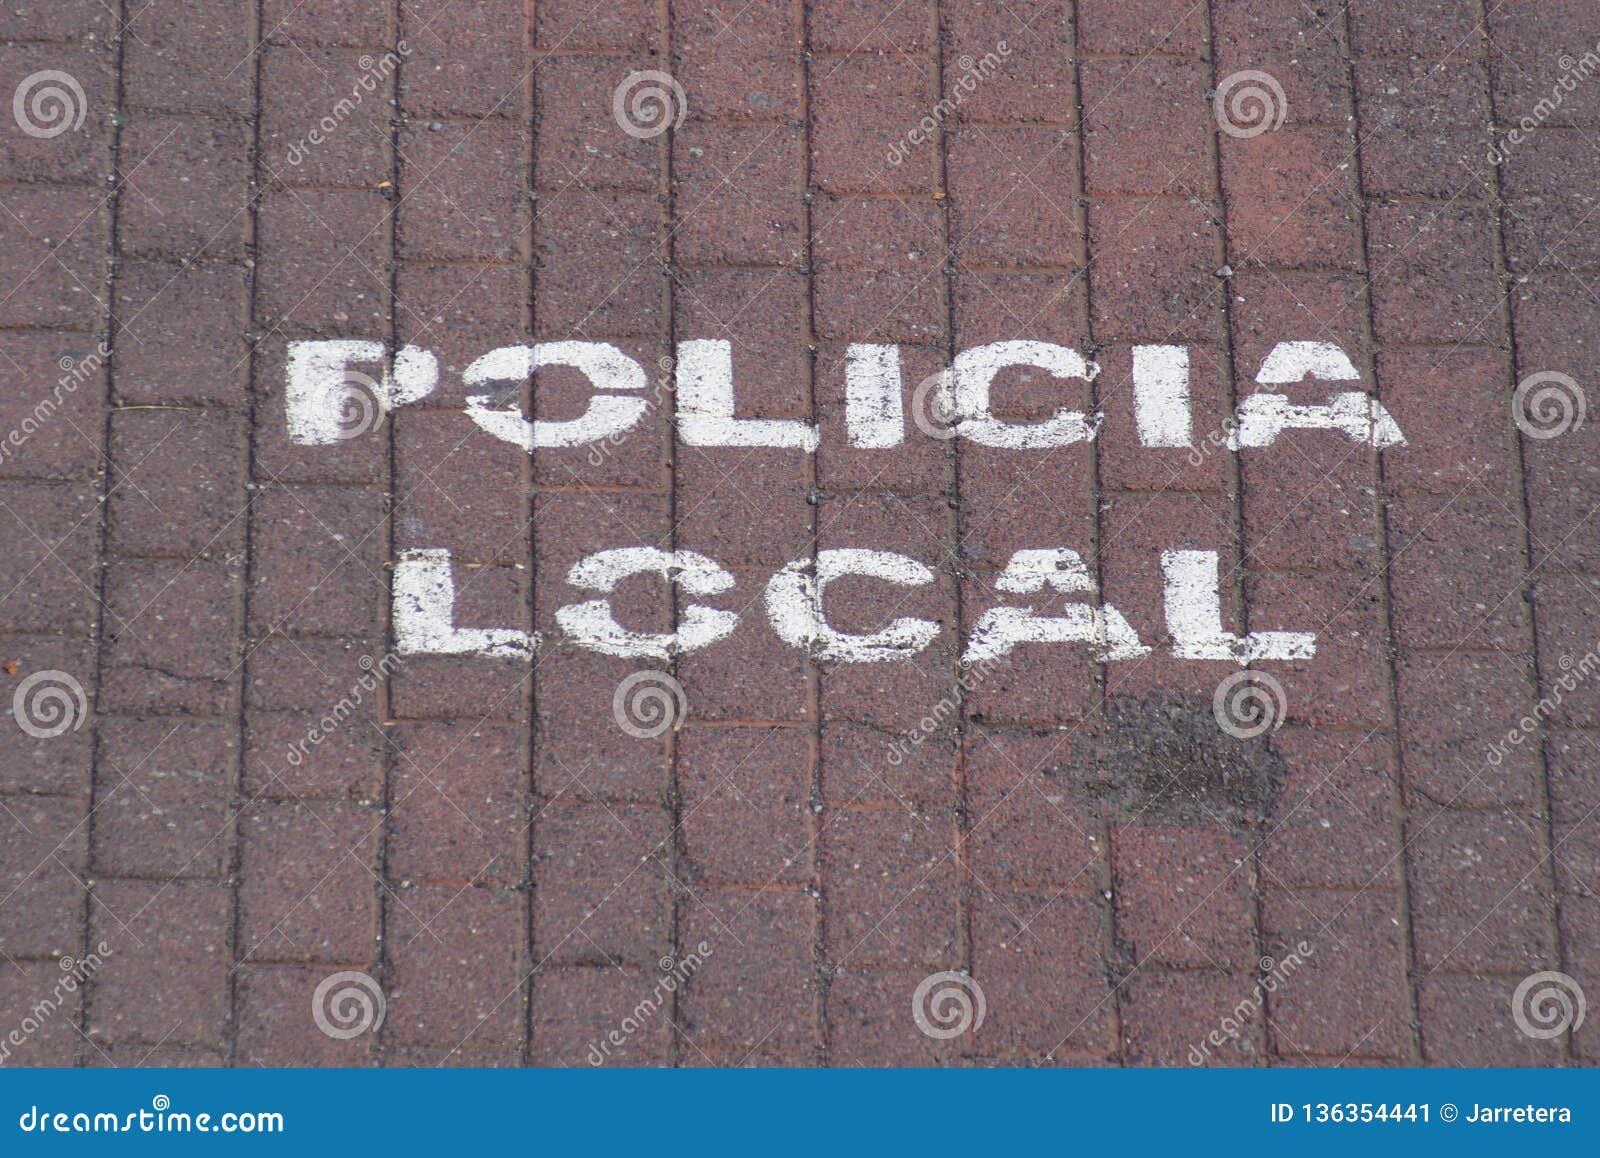 spanish road marking sign: policia local